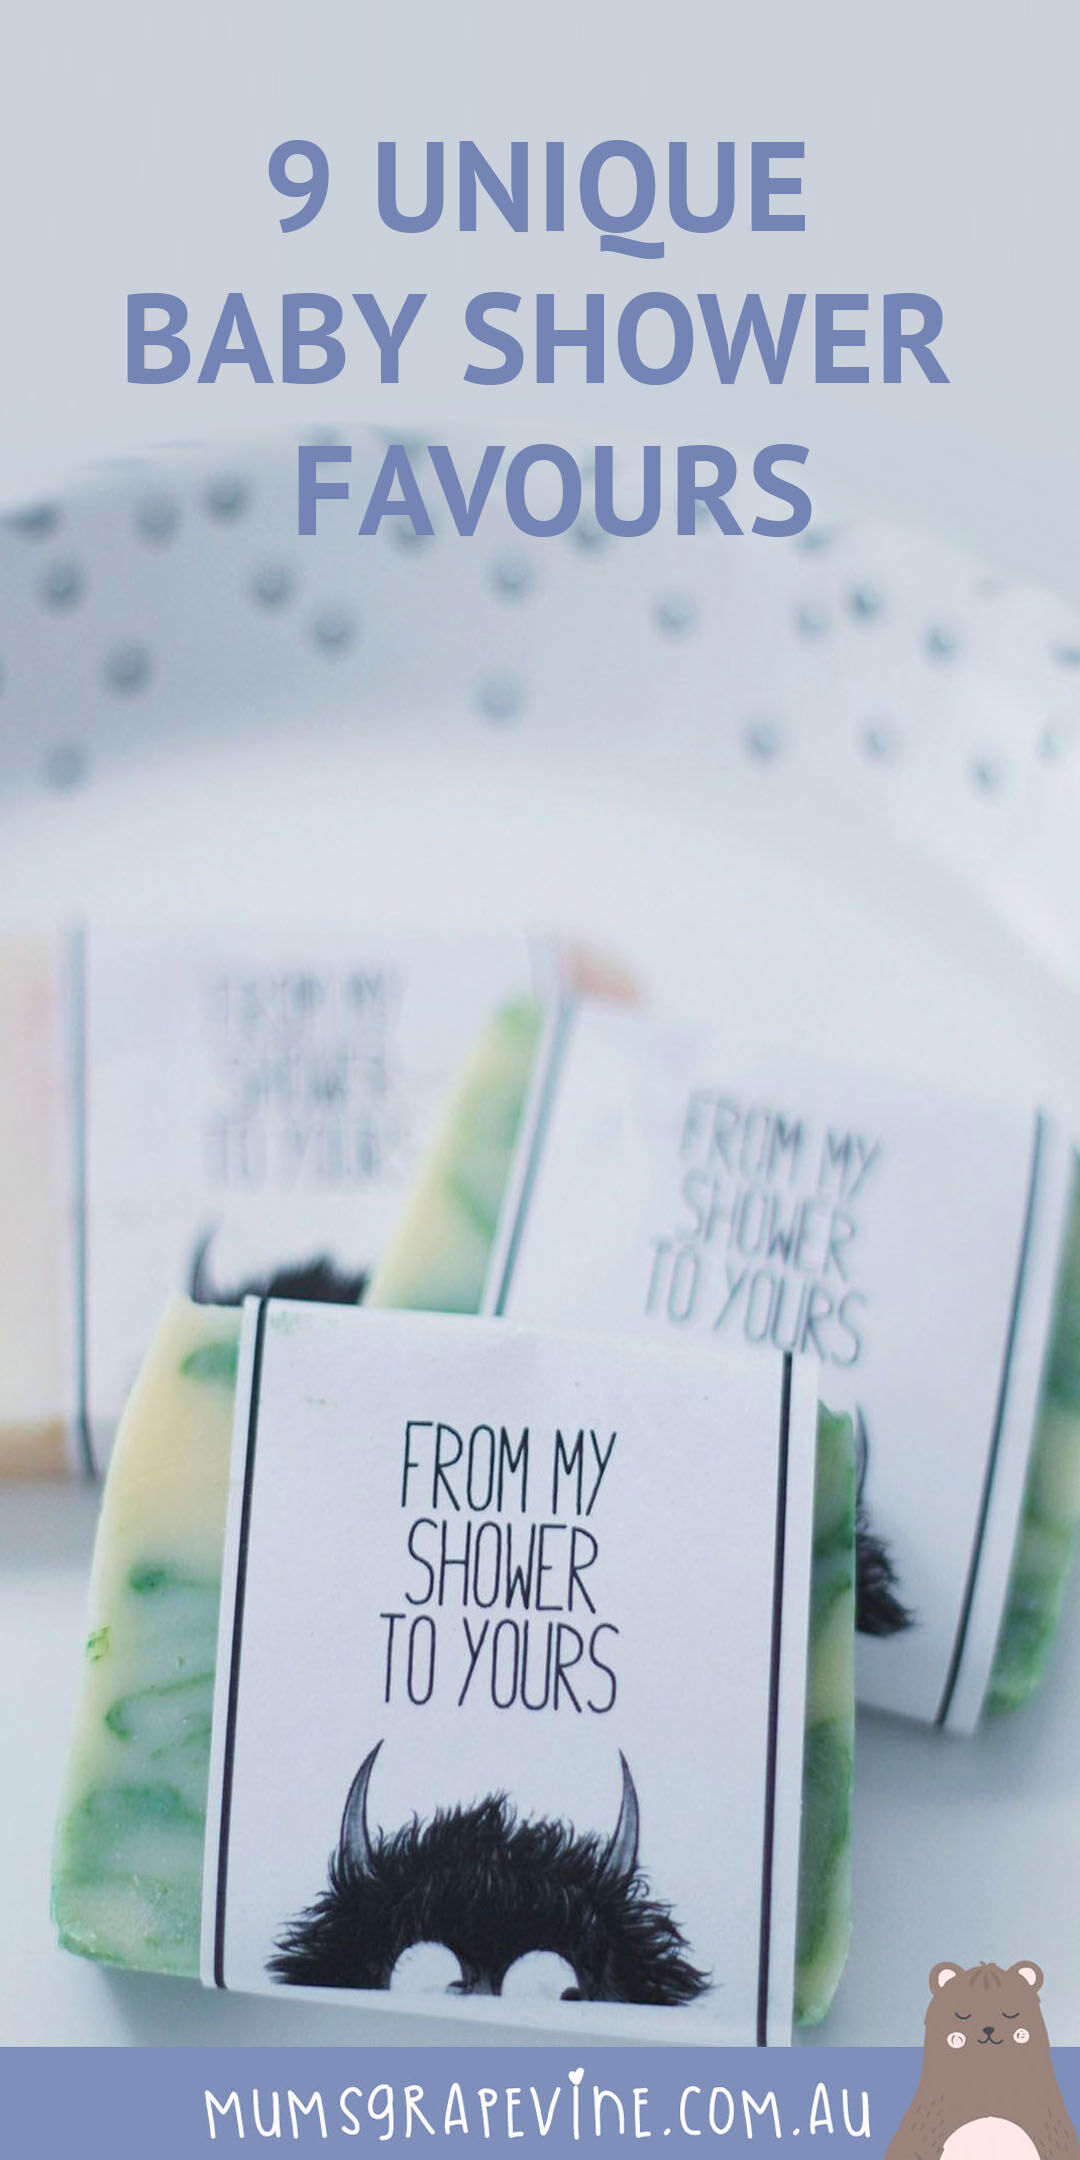 9 unique baby shower favours your guests will love